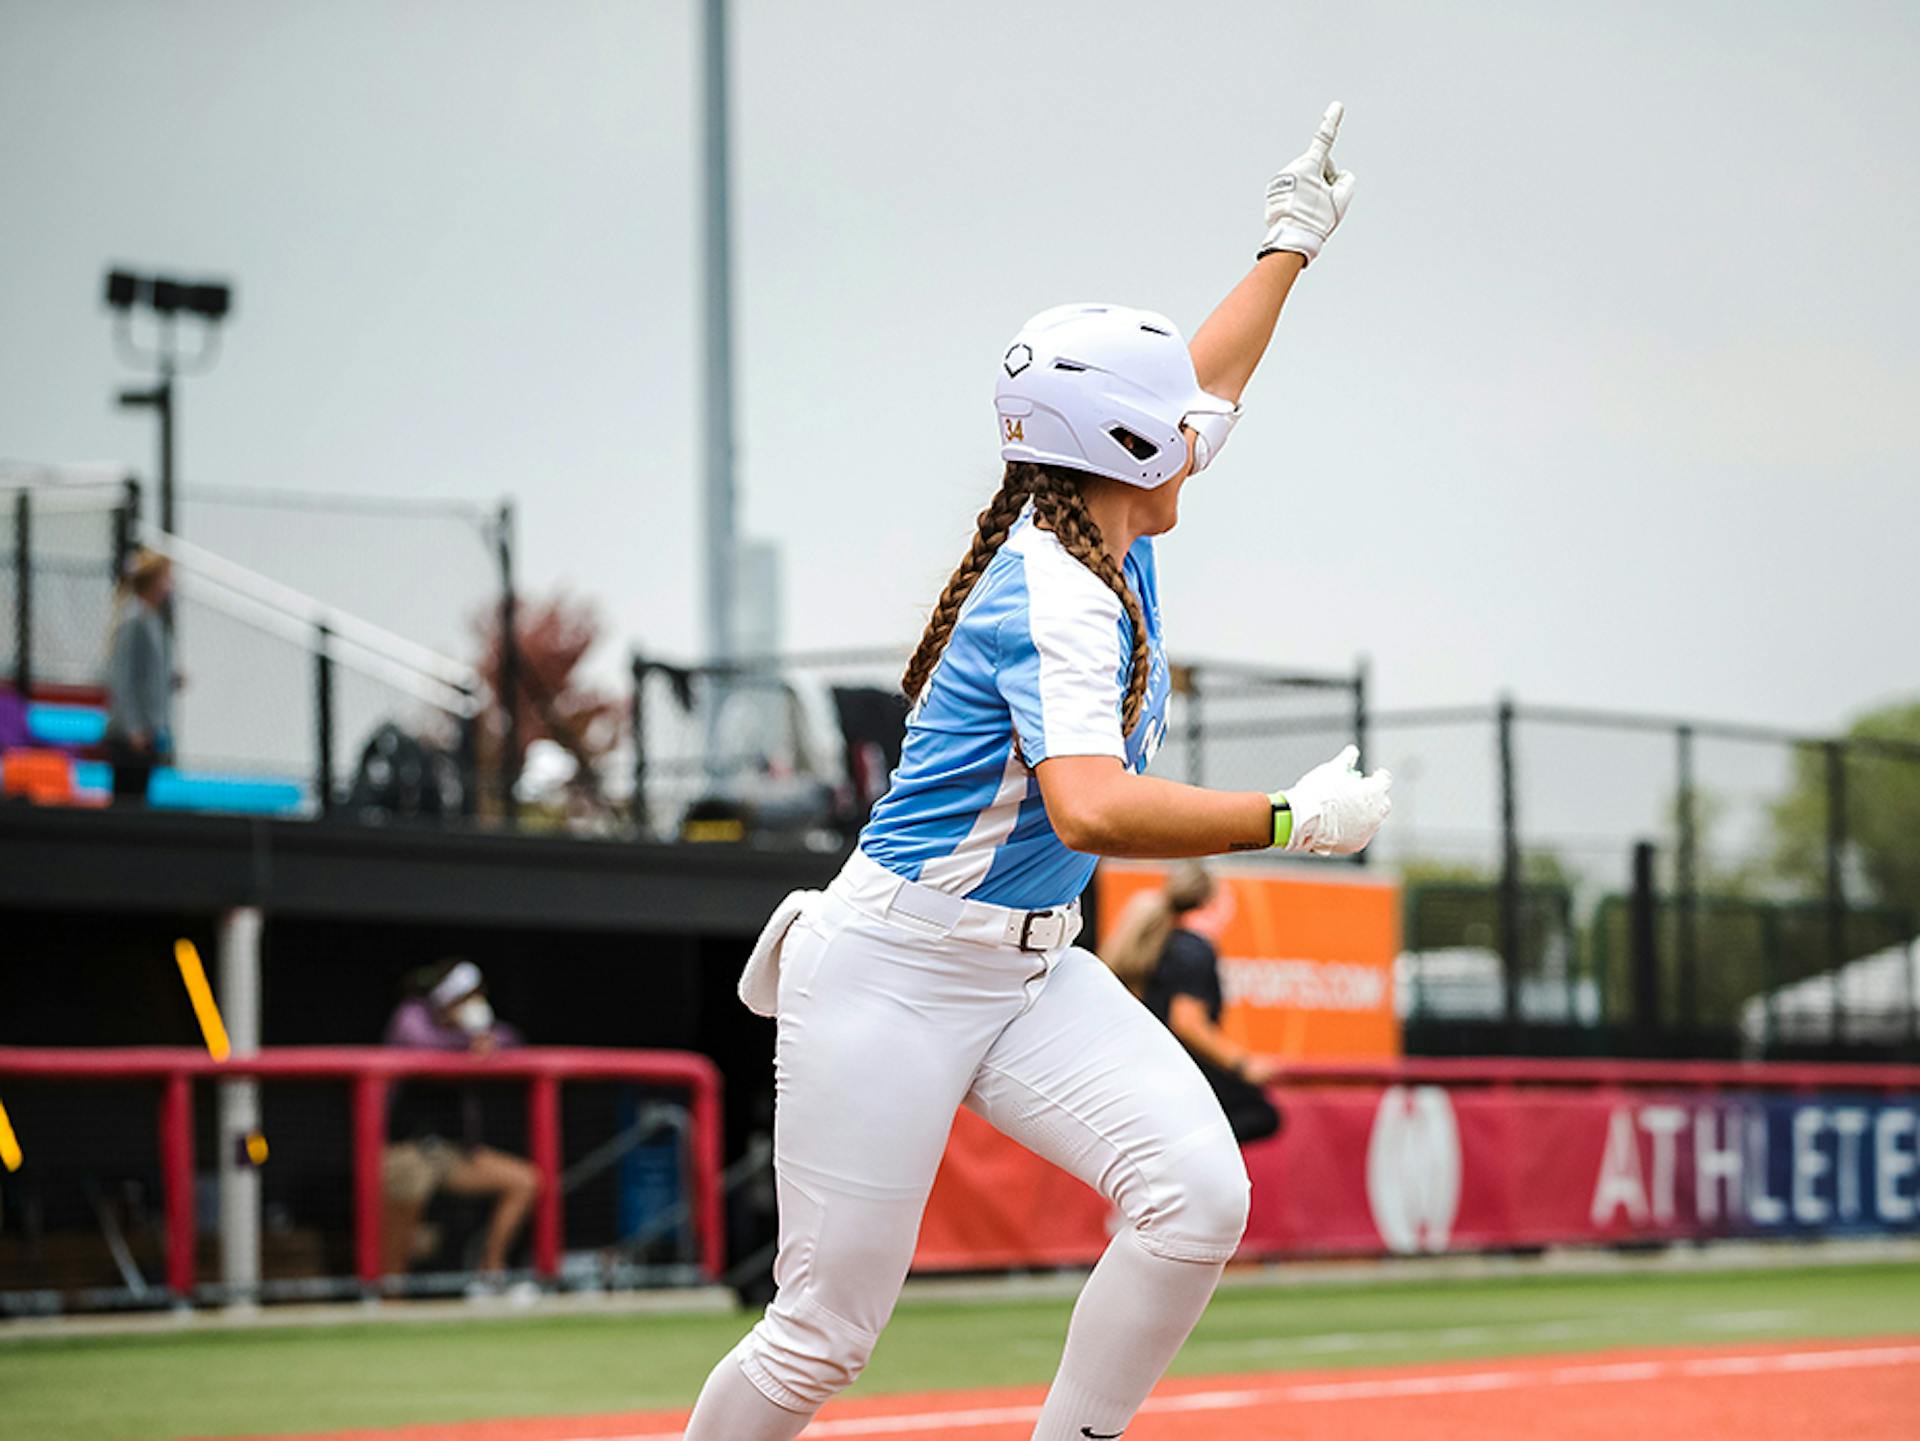 Athletes Unlimited Softball to return to Rosemont for season 2 in 2021